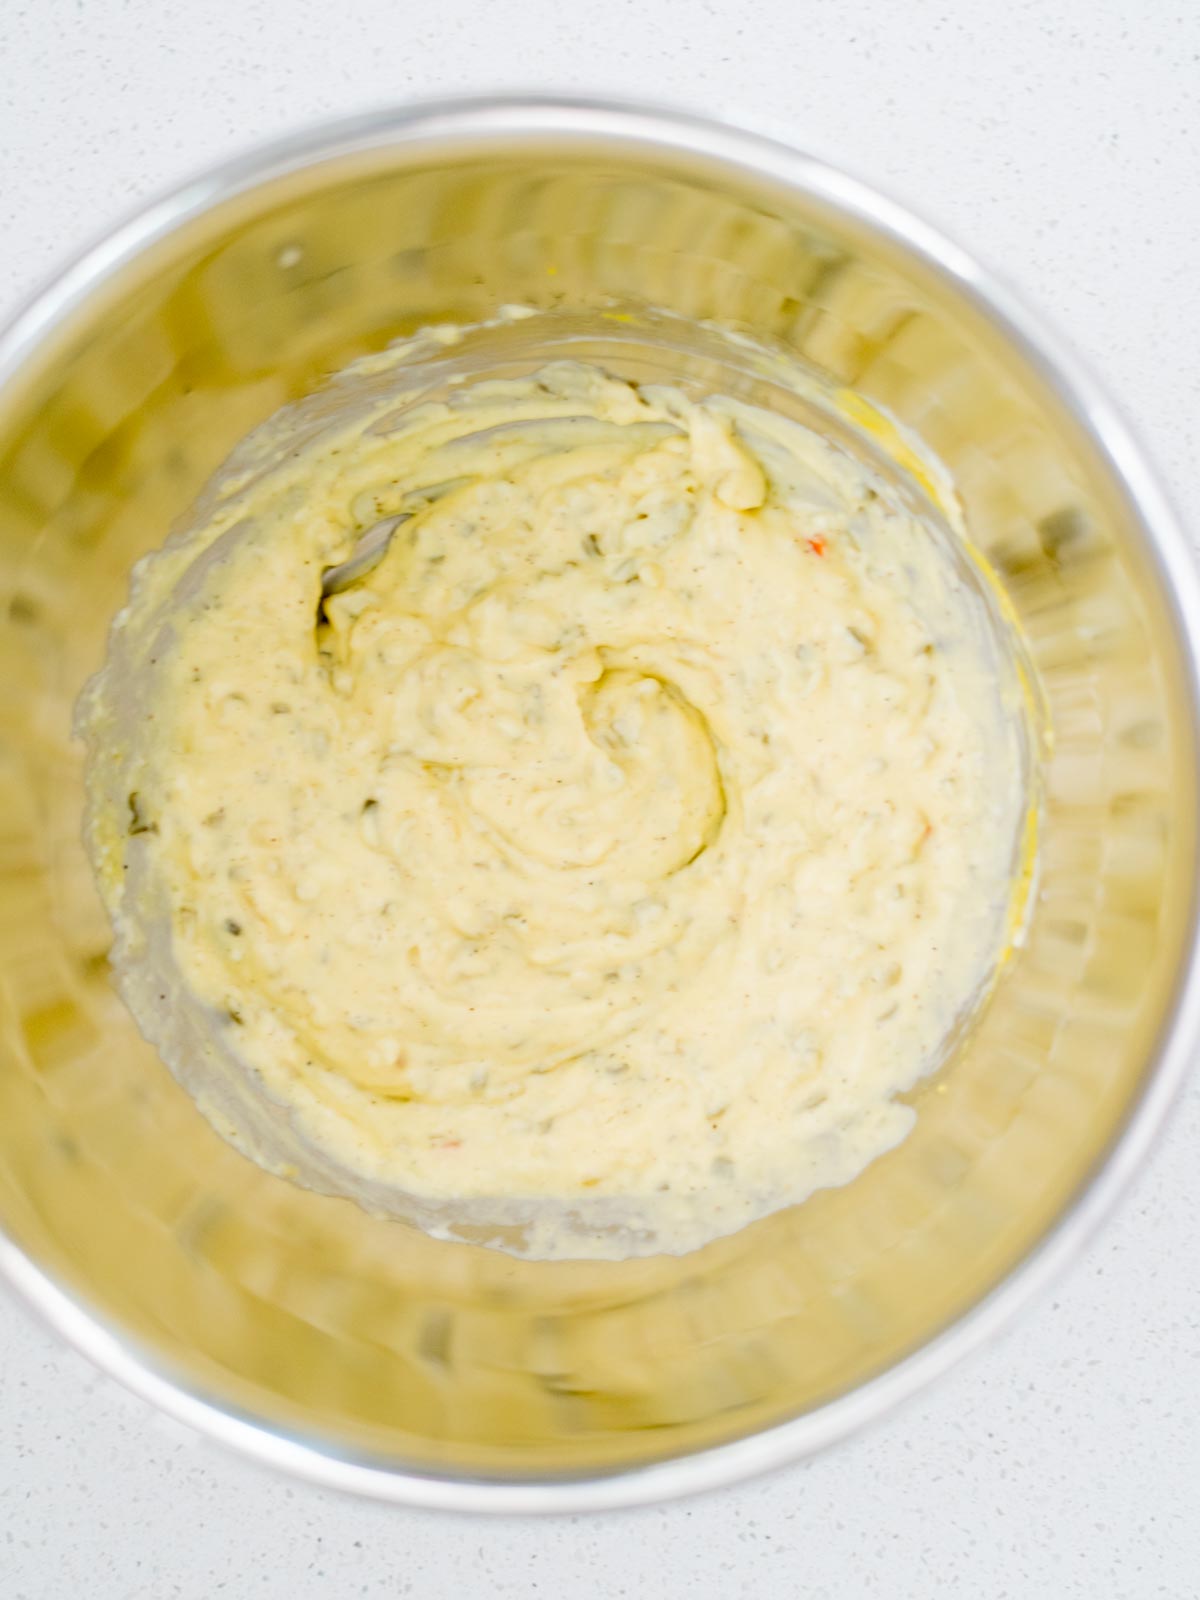 potato salad dressing ingredients mixed together in a mixing bowl